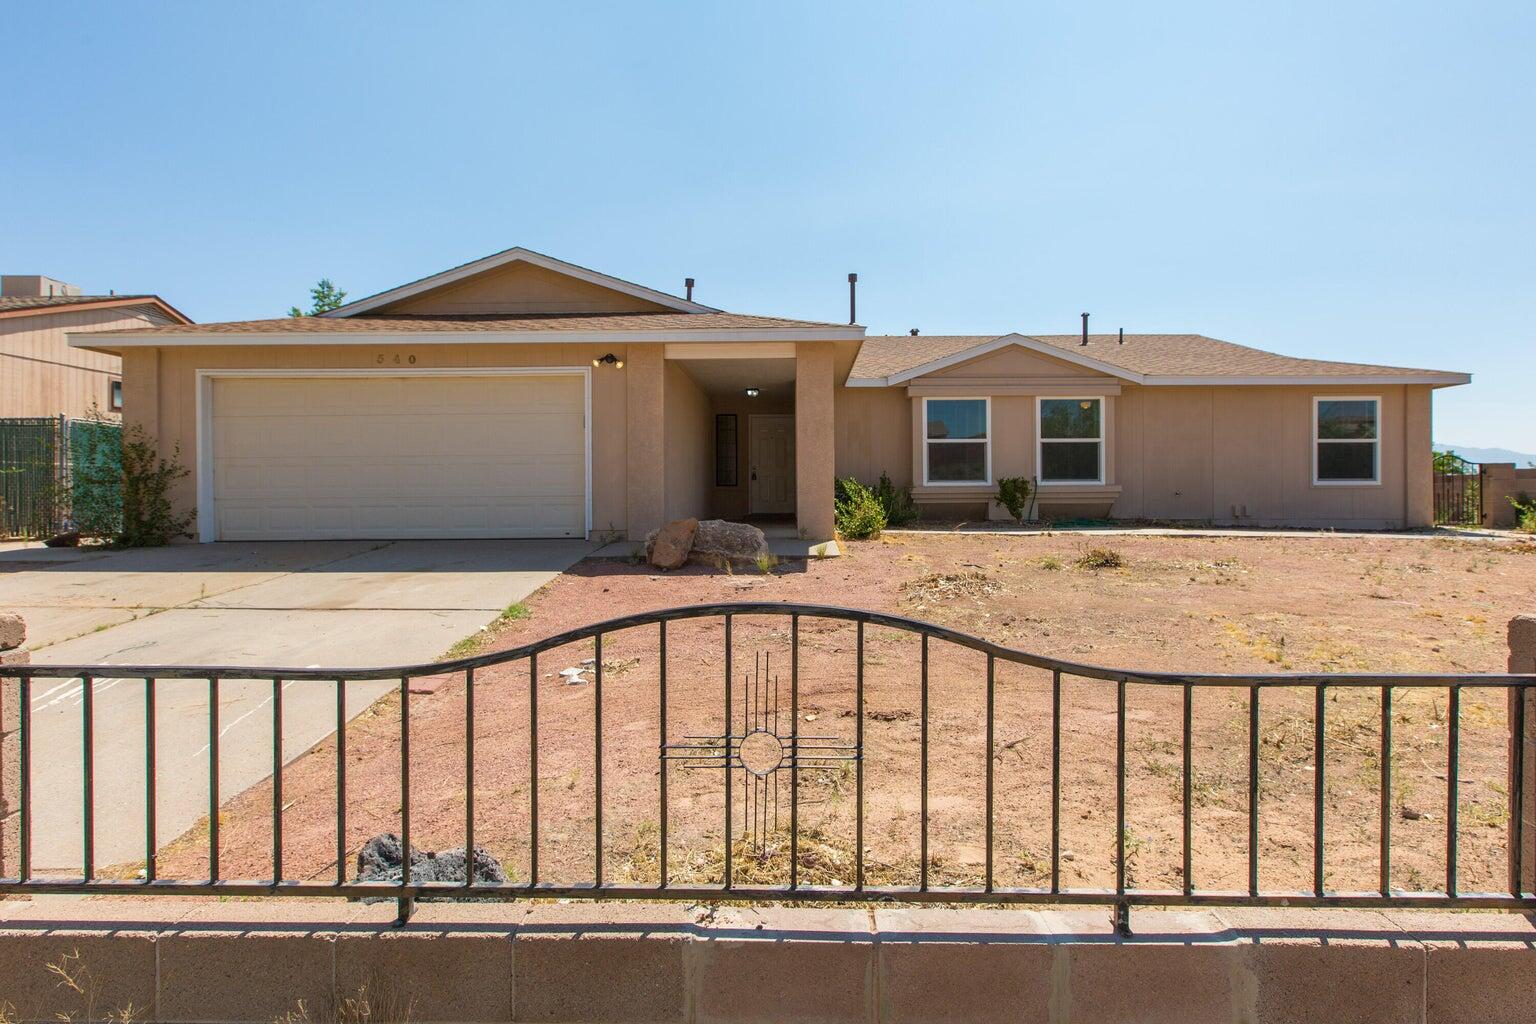 Excellent opportunity to own this well maintained 4 bed 2 bath home with a pool. Home is light and bright and has a great backyard with a patio off the dining area and access to the back yard from the oversized master bedroom!